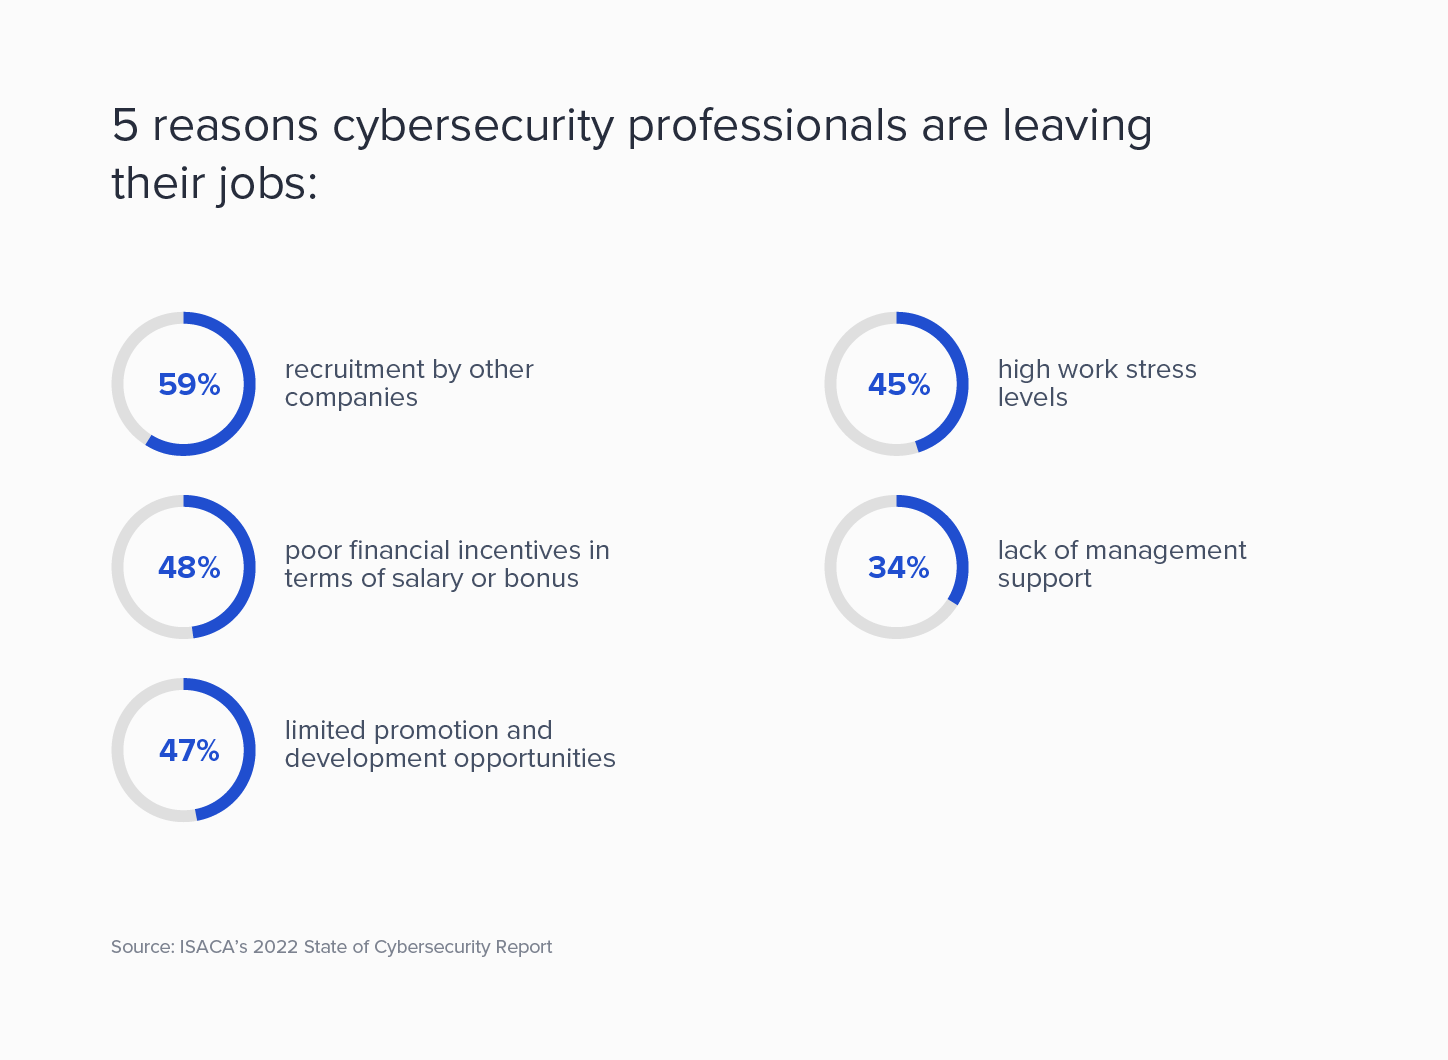 High stress levels and limited promotions are among the reasons why cyber professionals leave jobs.